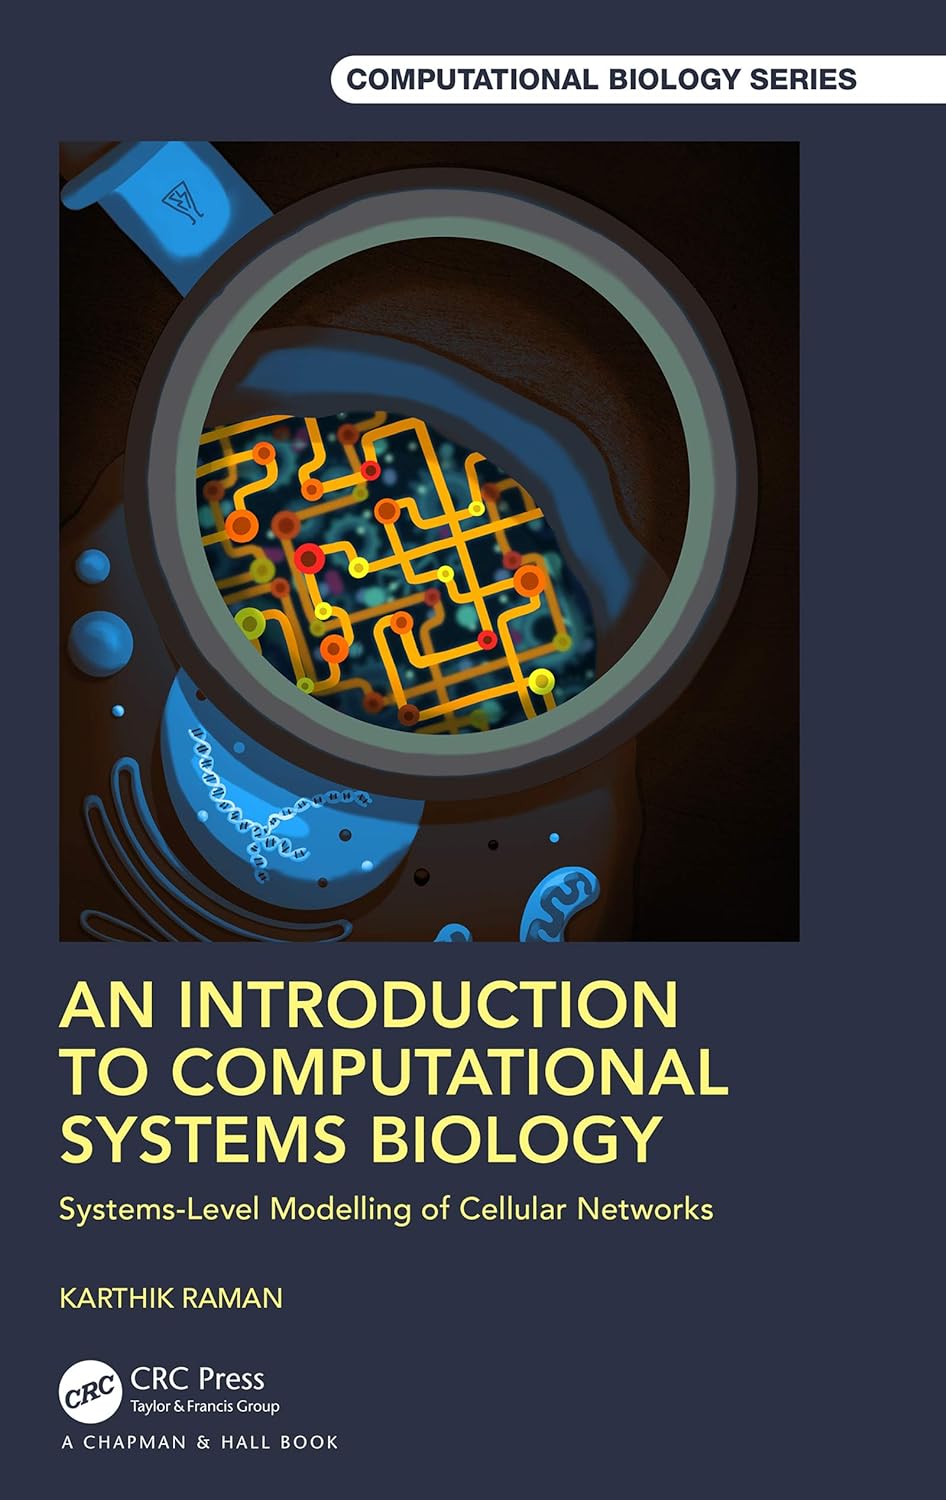 (EBook PDF)An Introduction to Computational Systems Biology: Systems-Level Modelling of Cellular Networks by Karthik Raman